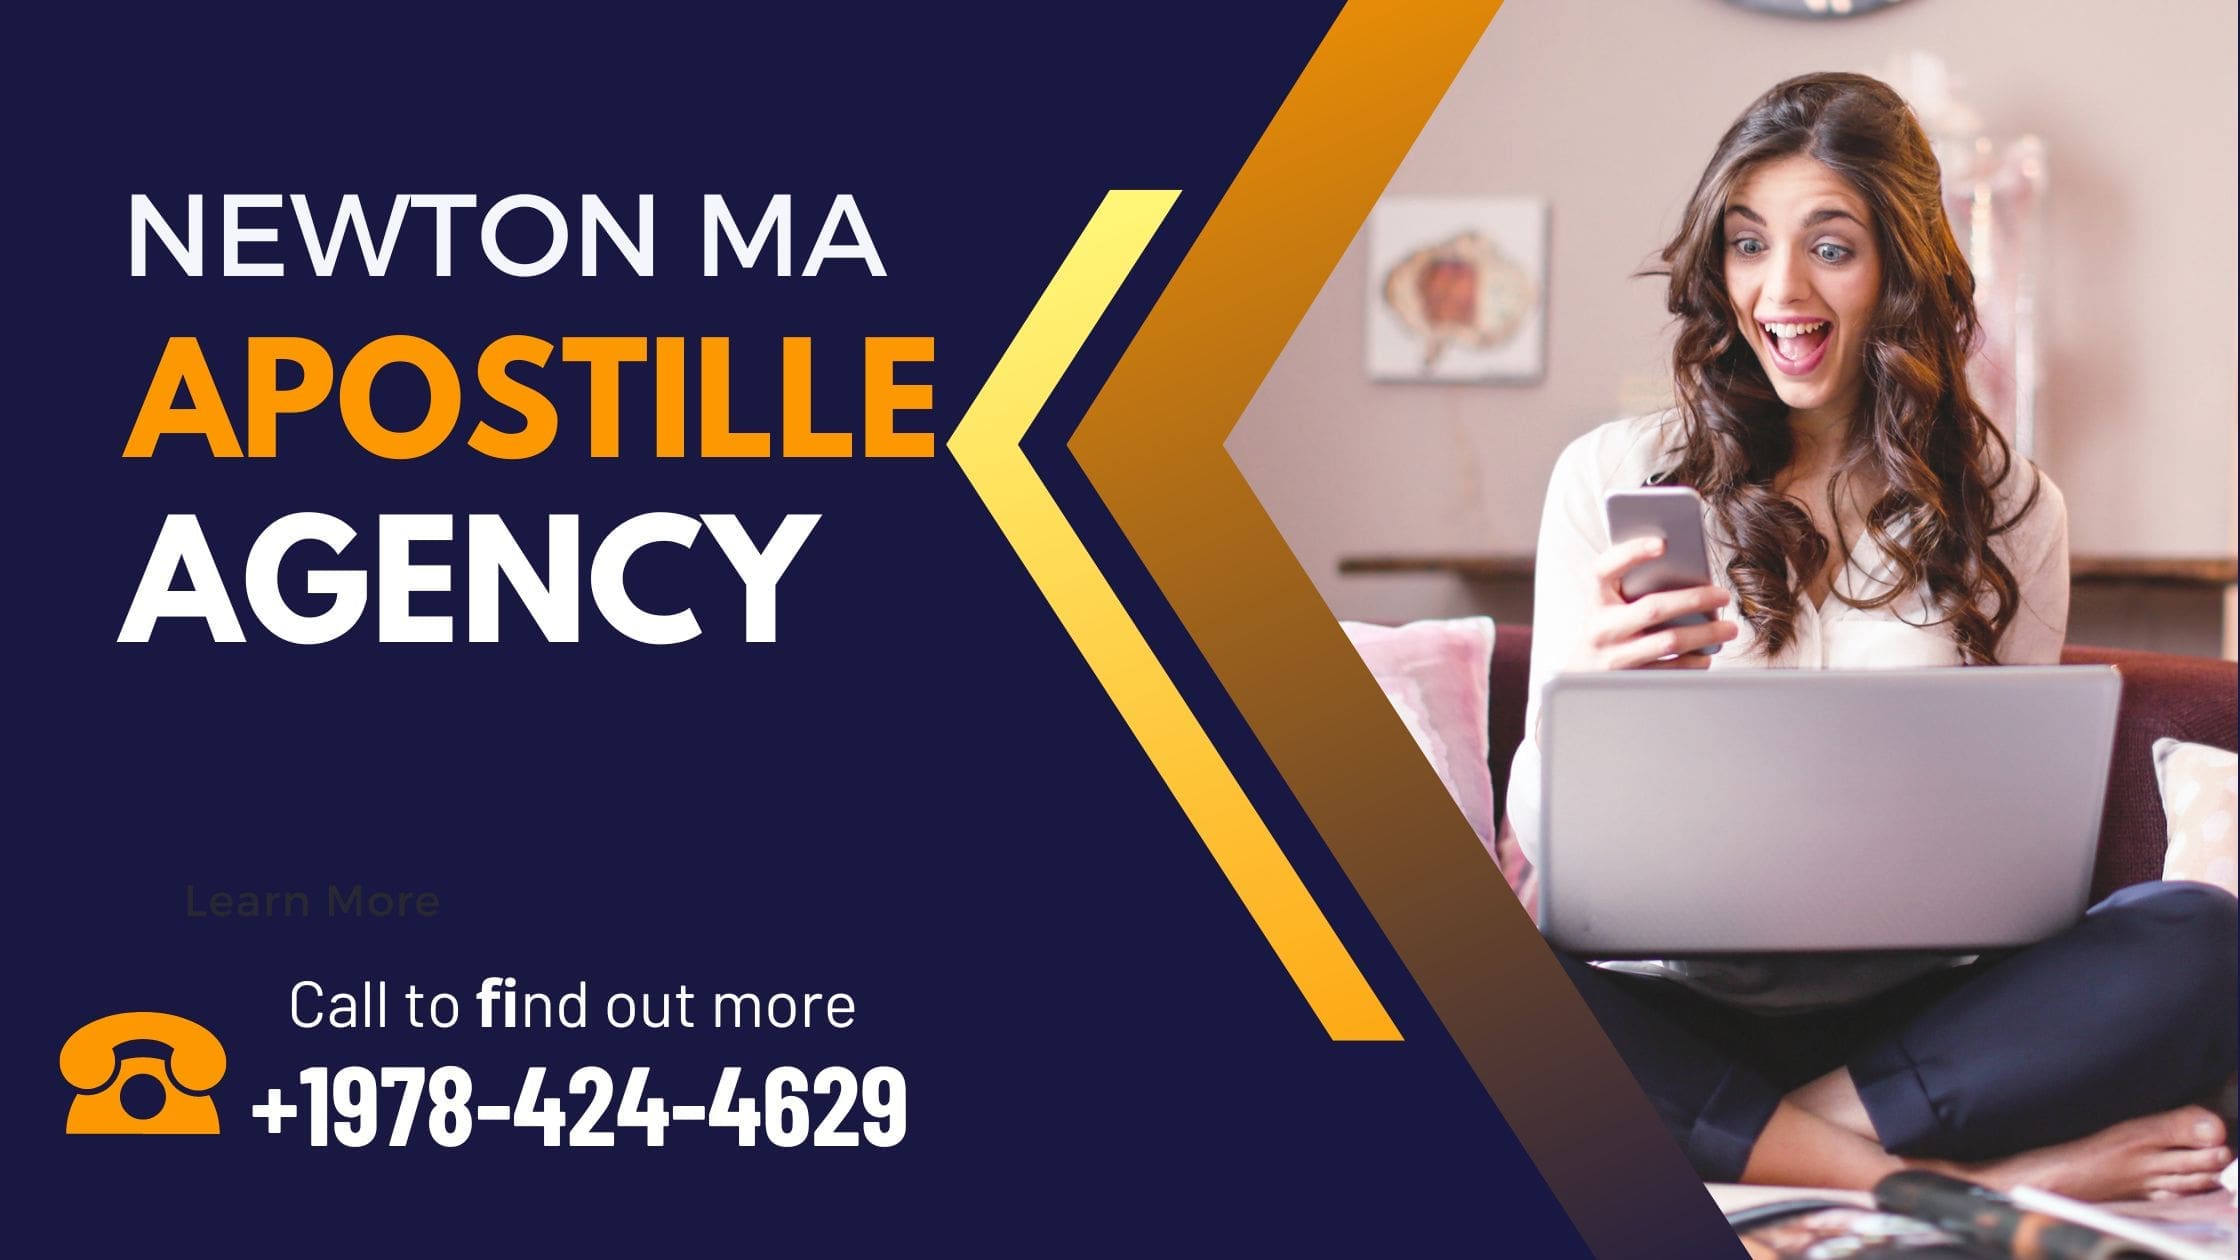 Apostille Services in MA & NH: Birth & Marriage Certificate Processing